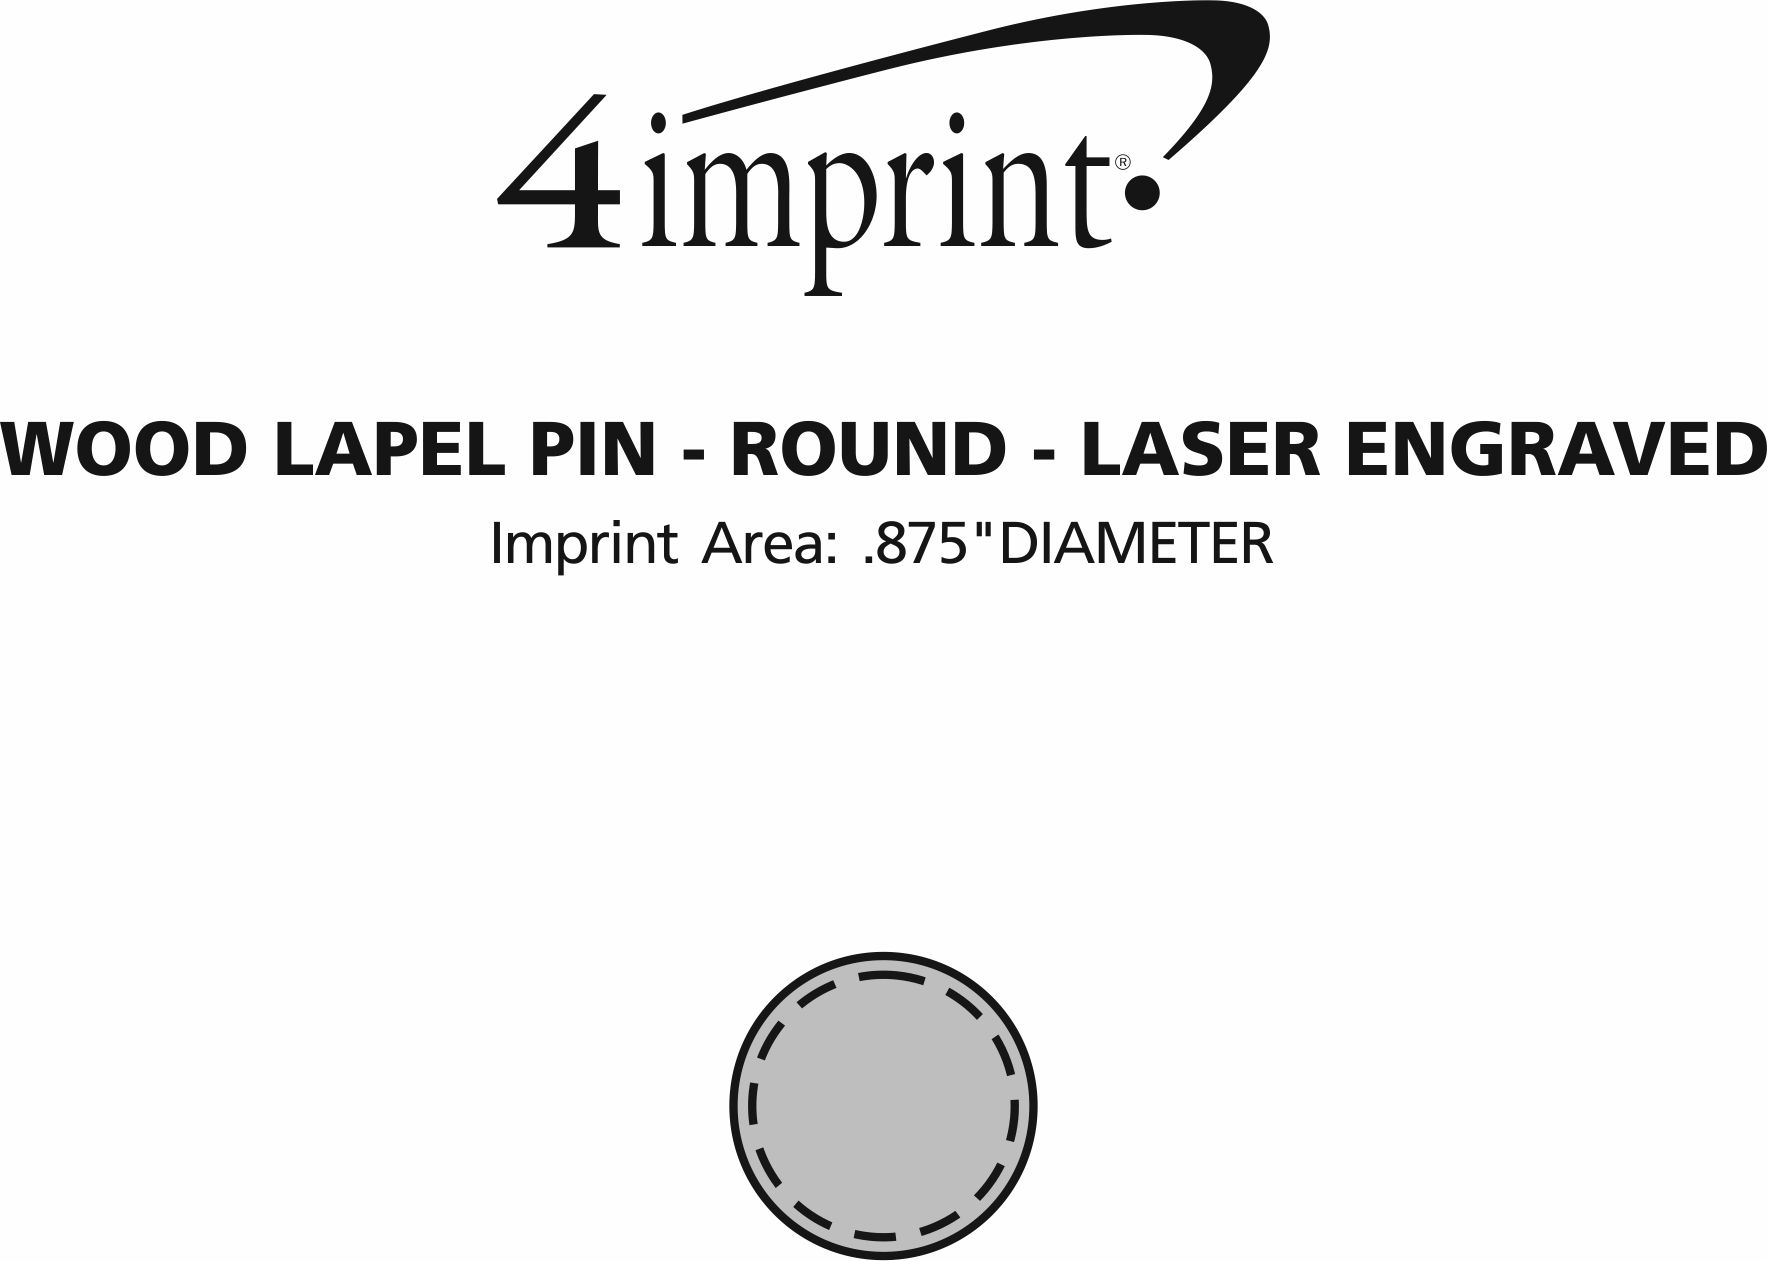 Imprint Area of Wood Lapel Pin - Round - Laser Engraved